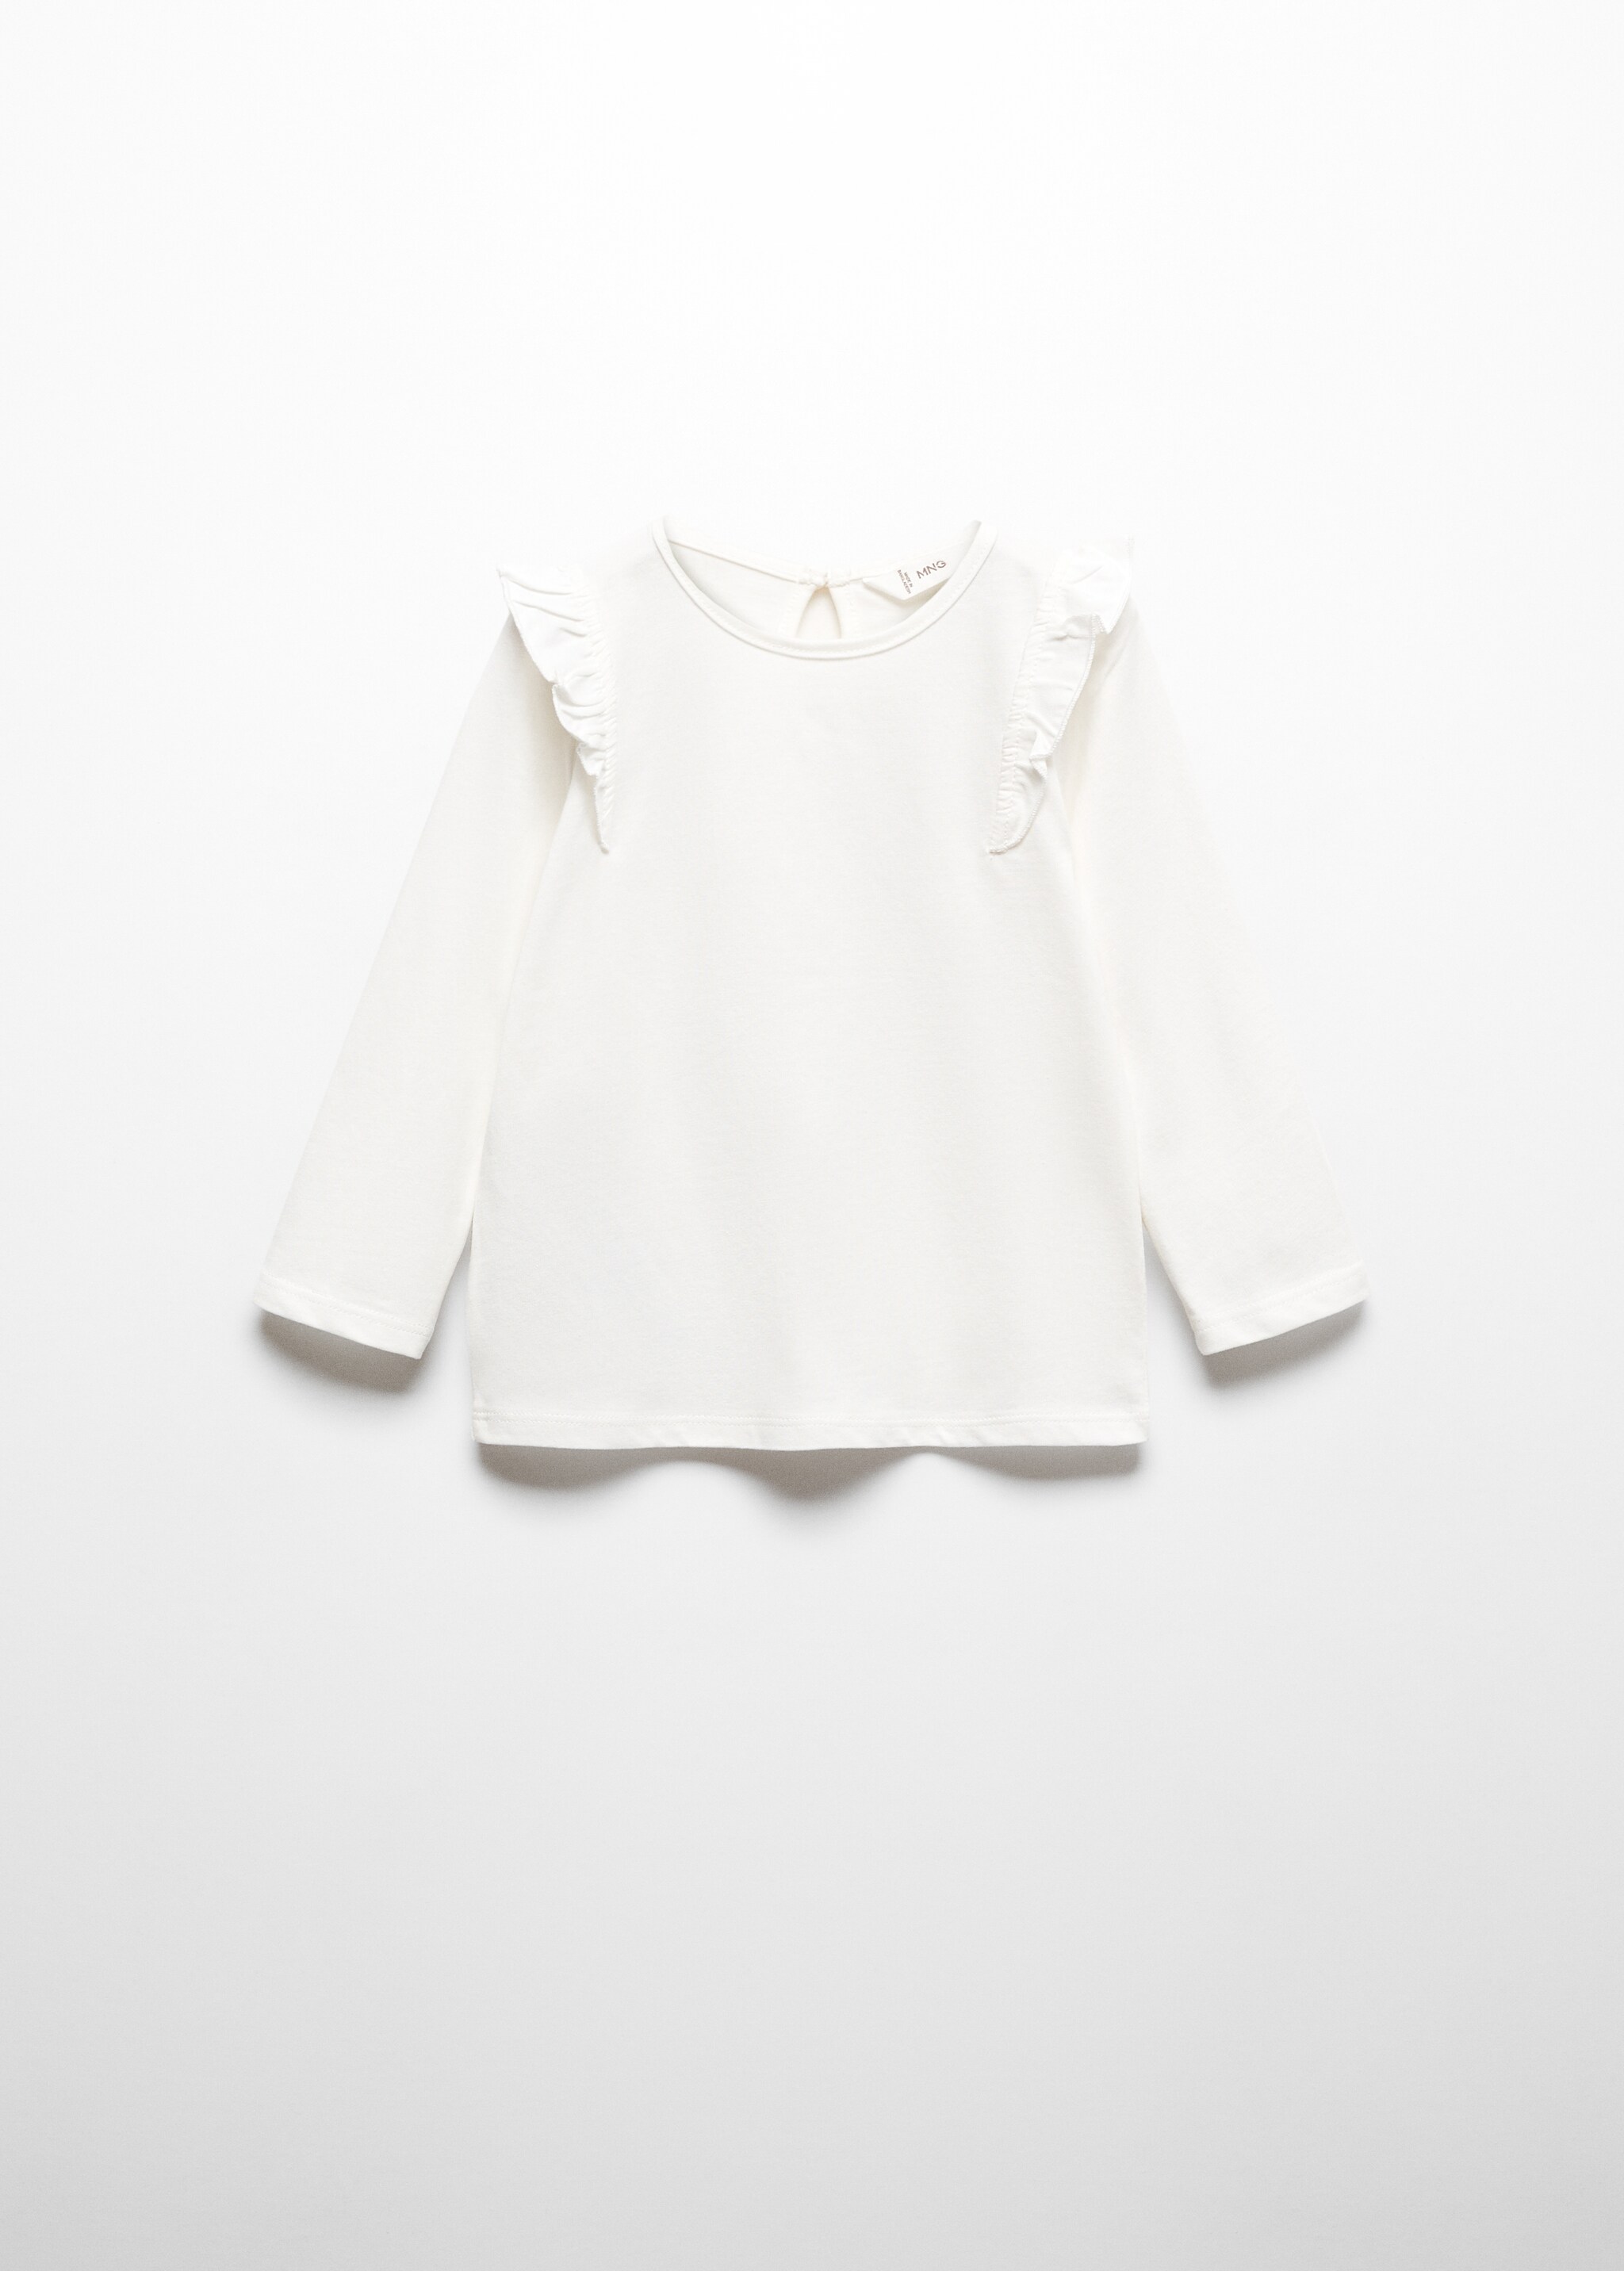 Long -sleeved t-shirt with ruffles - Article without model